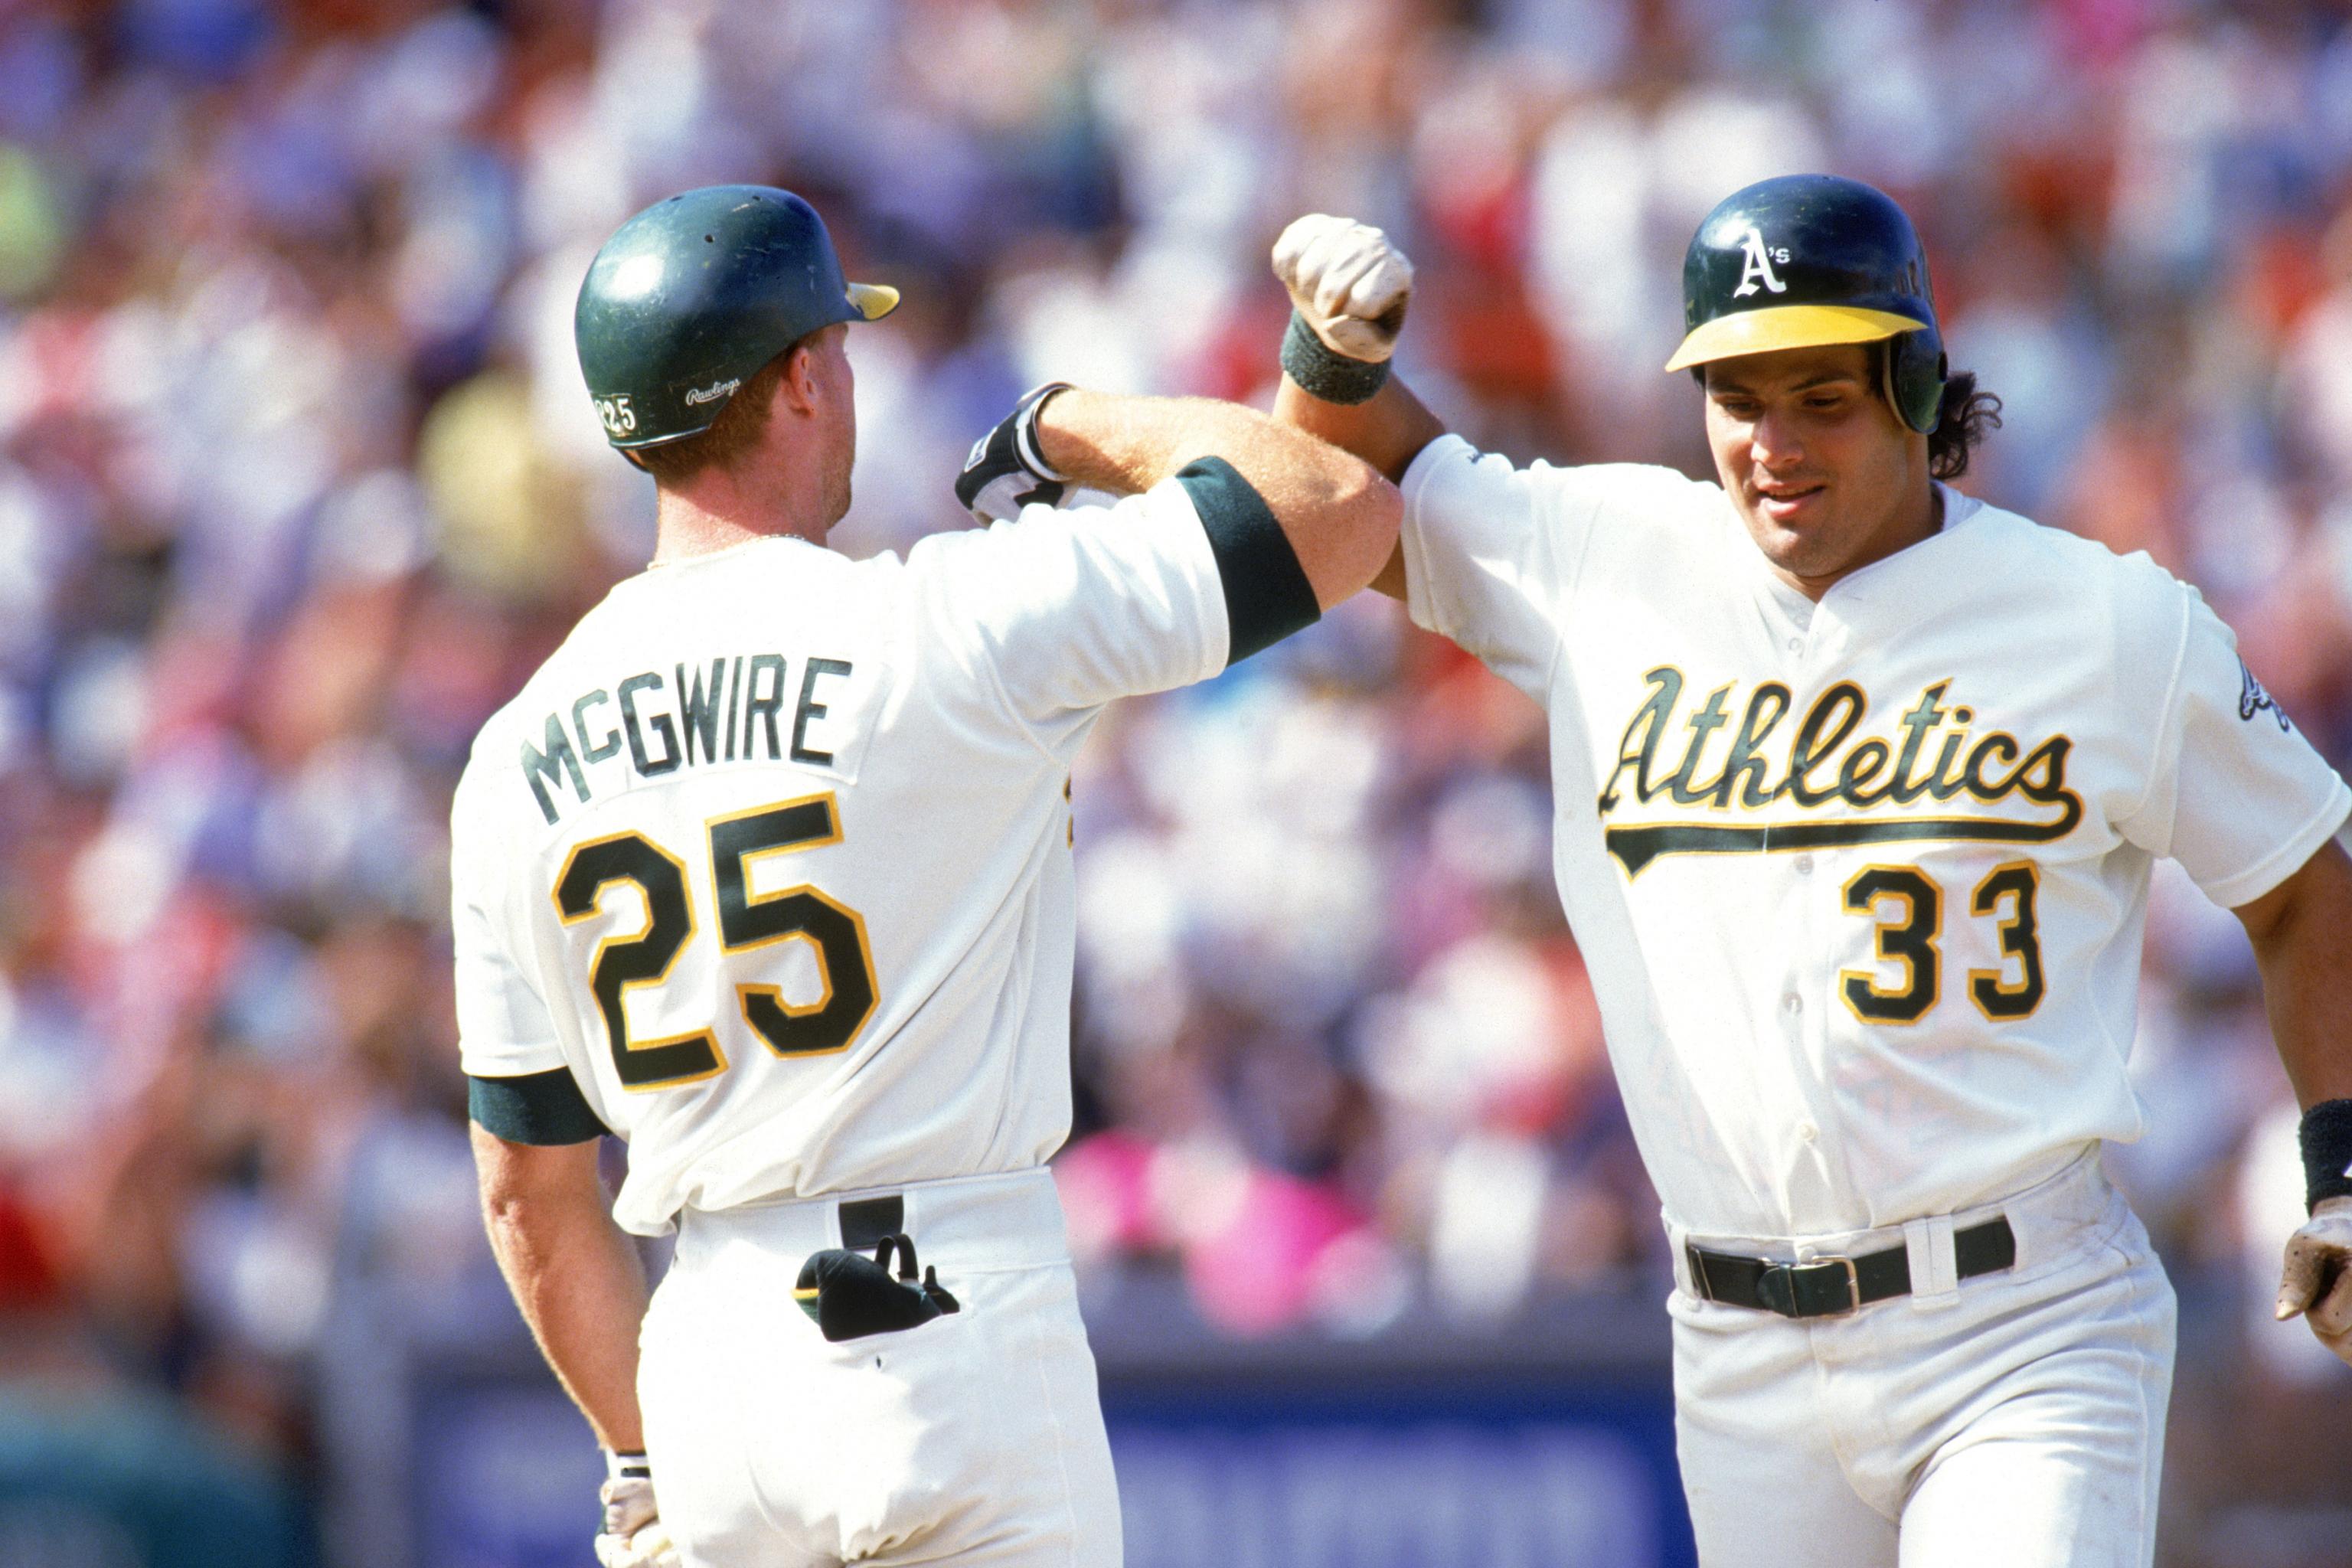 Mark McGwire said new allegations just his brother trying to 'sell